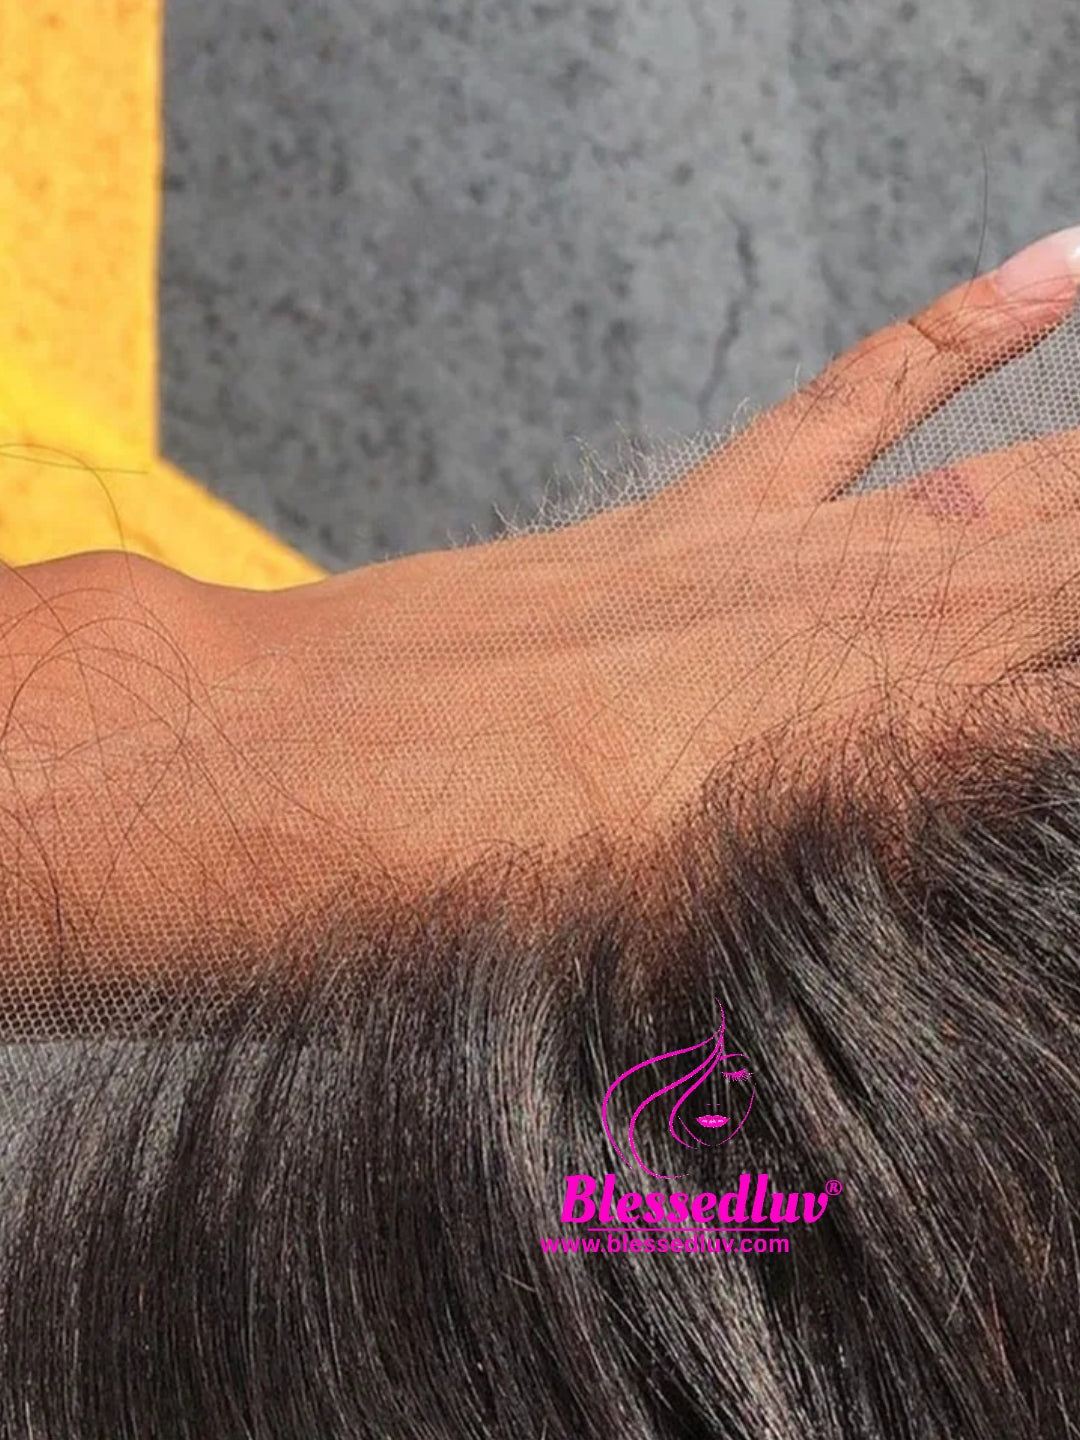 REAL 6x6 HD Lace Closure - ON SALE!-Wigs-Blessedluv.com-Brazilianweave.com